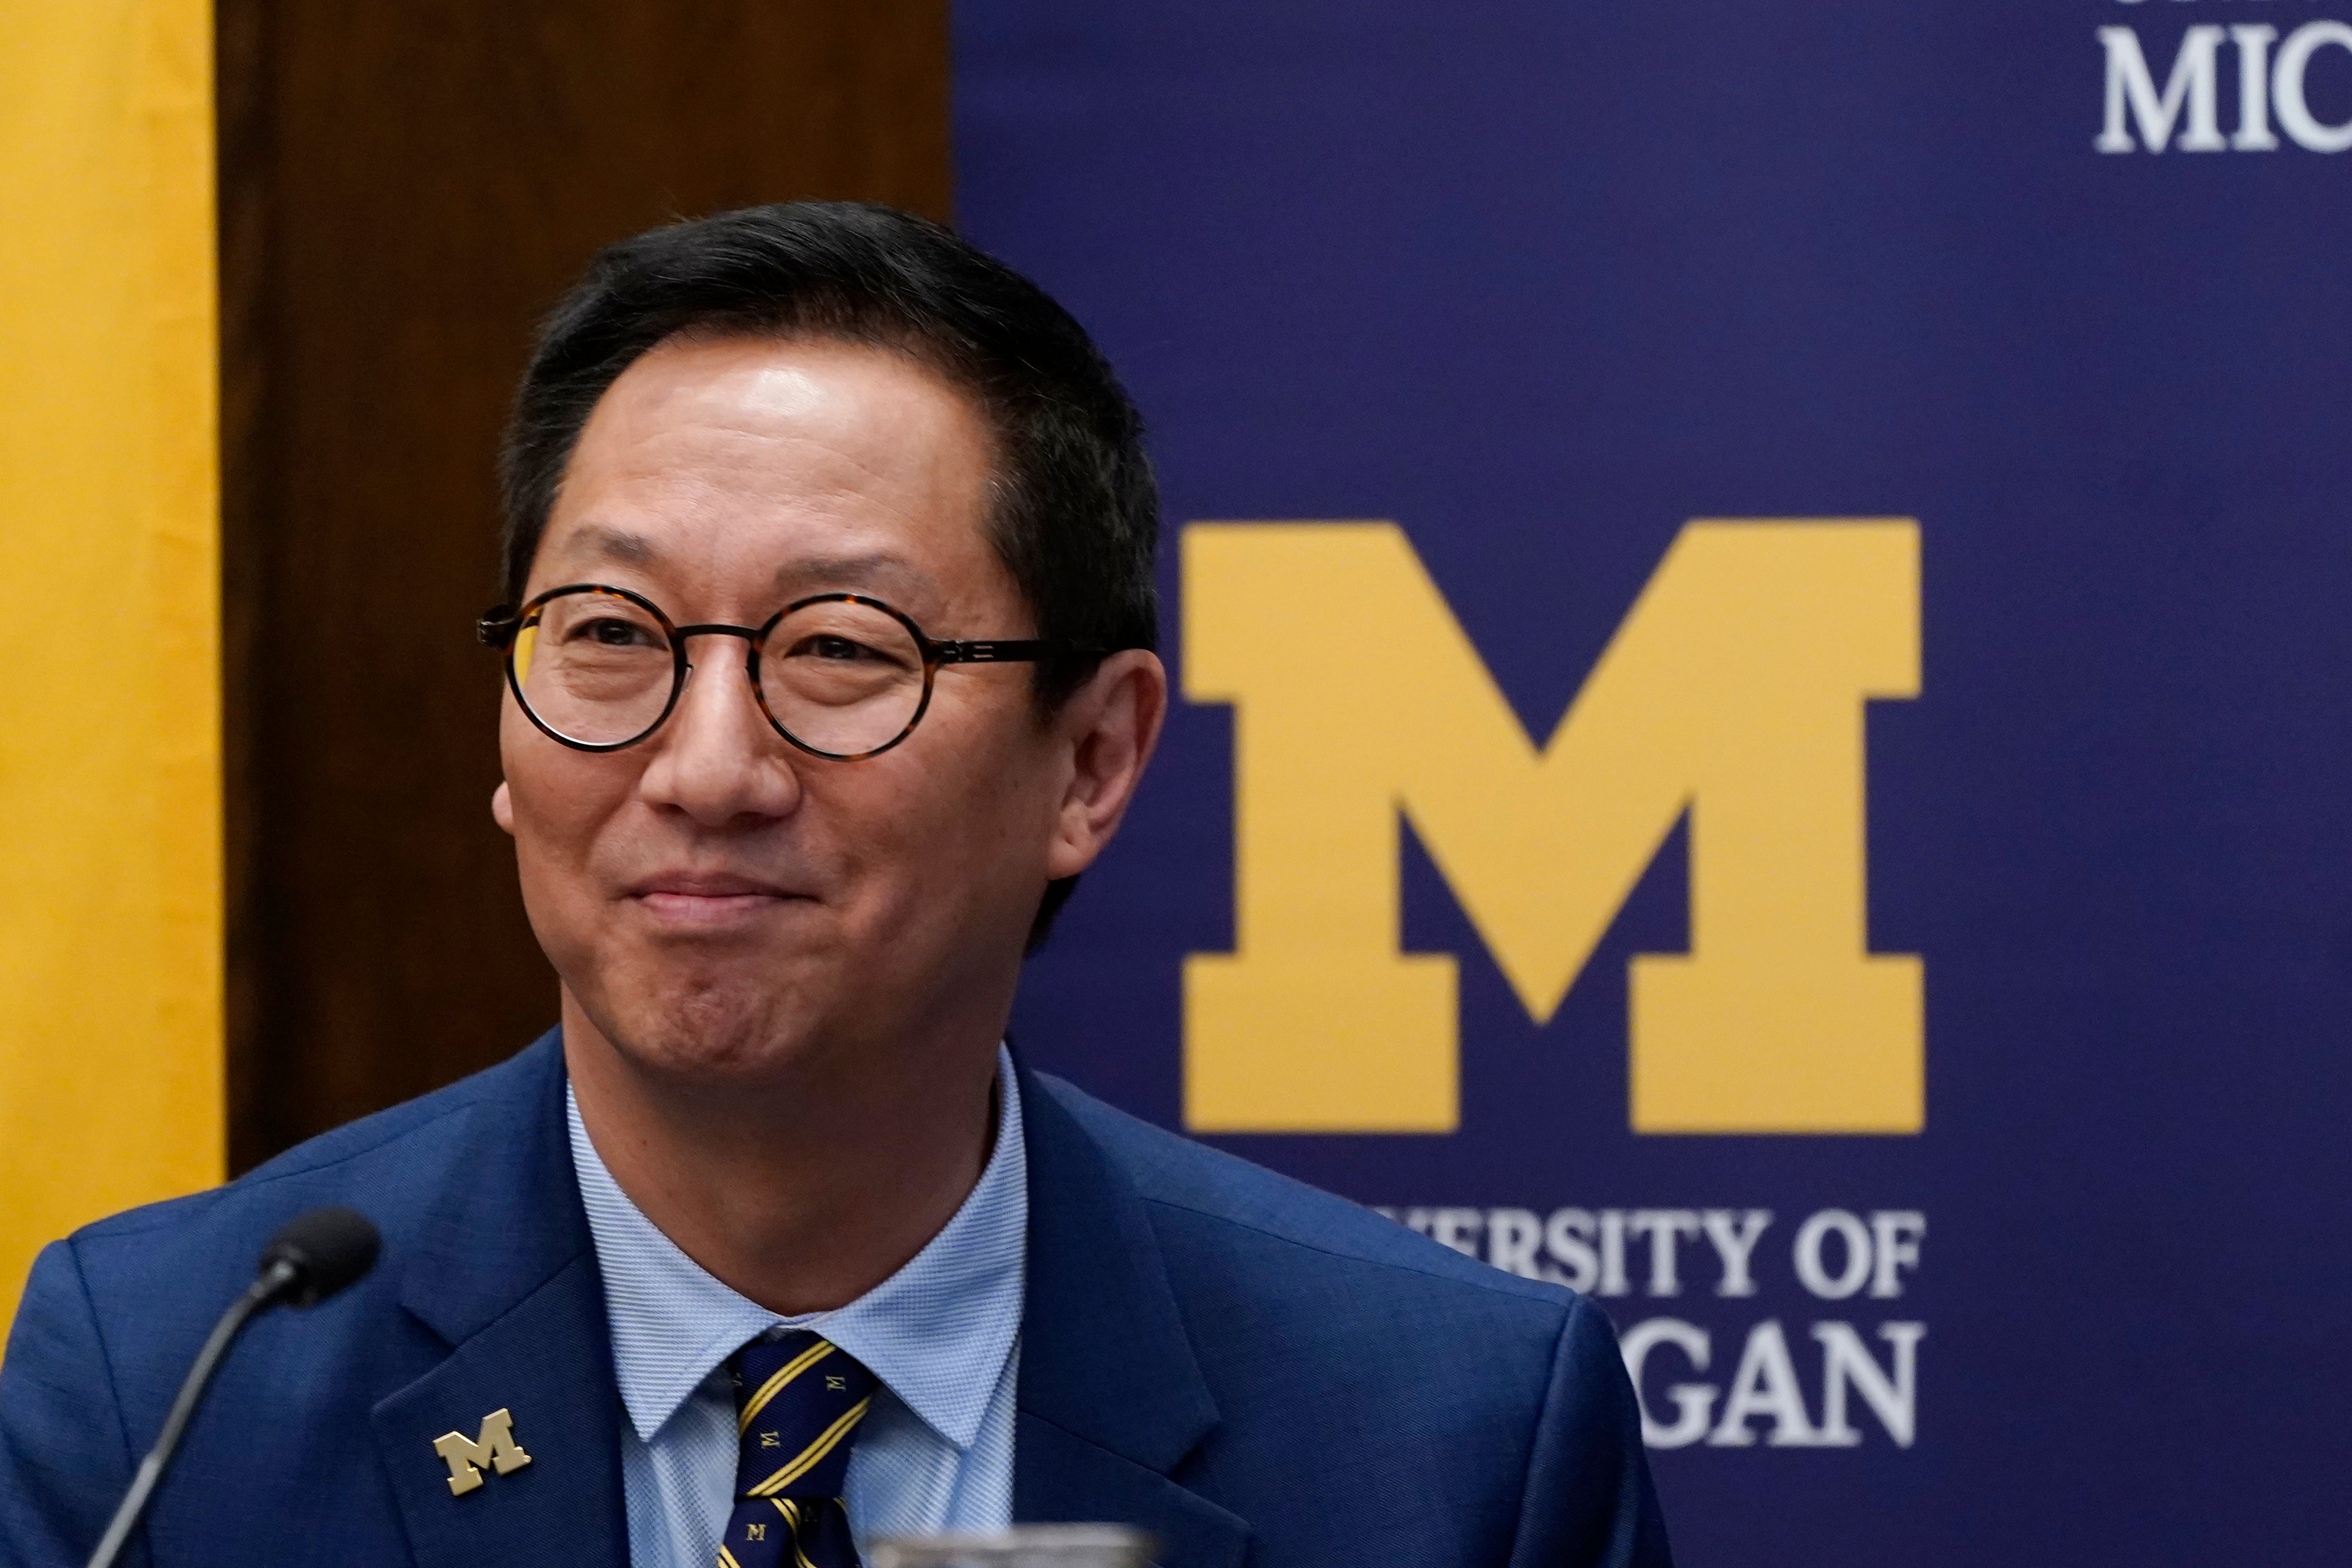 Univ. of Michigan names experienced leader Ono as president The